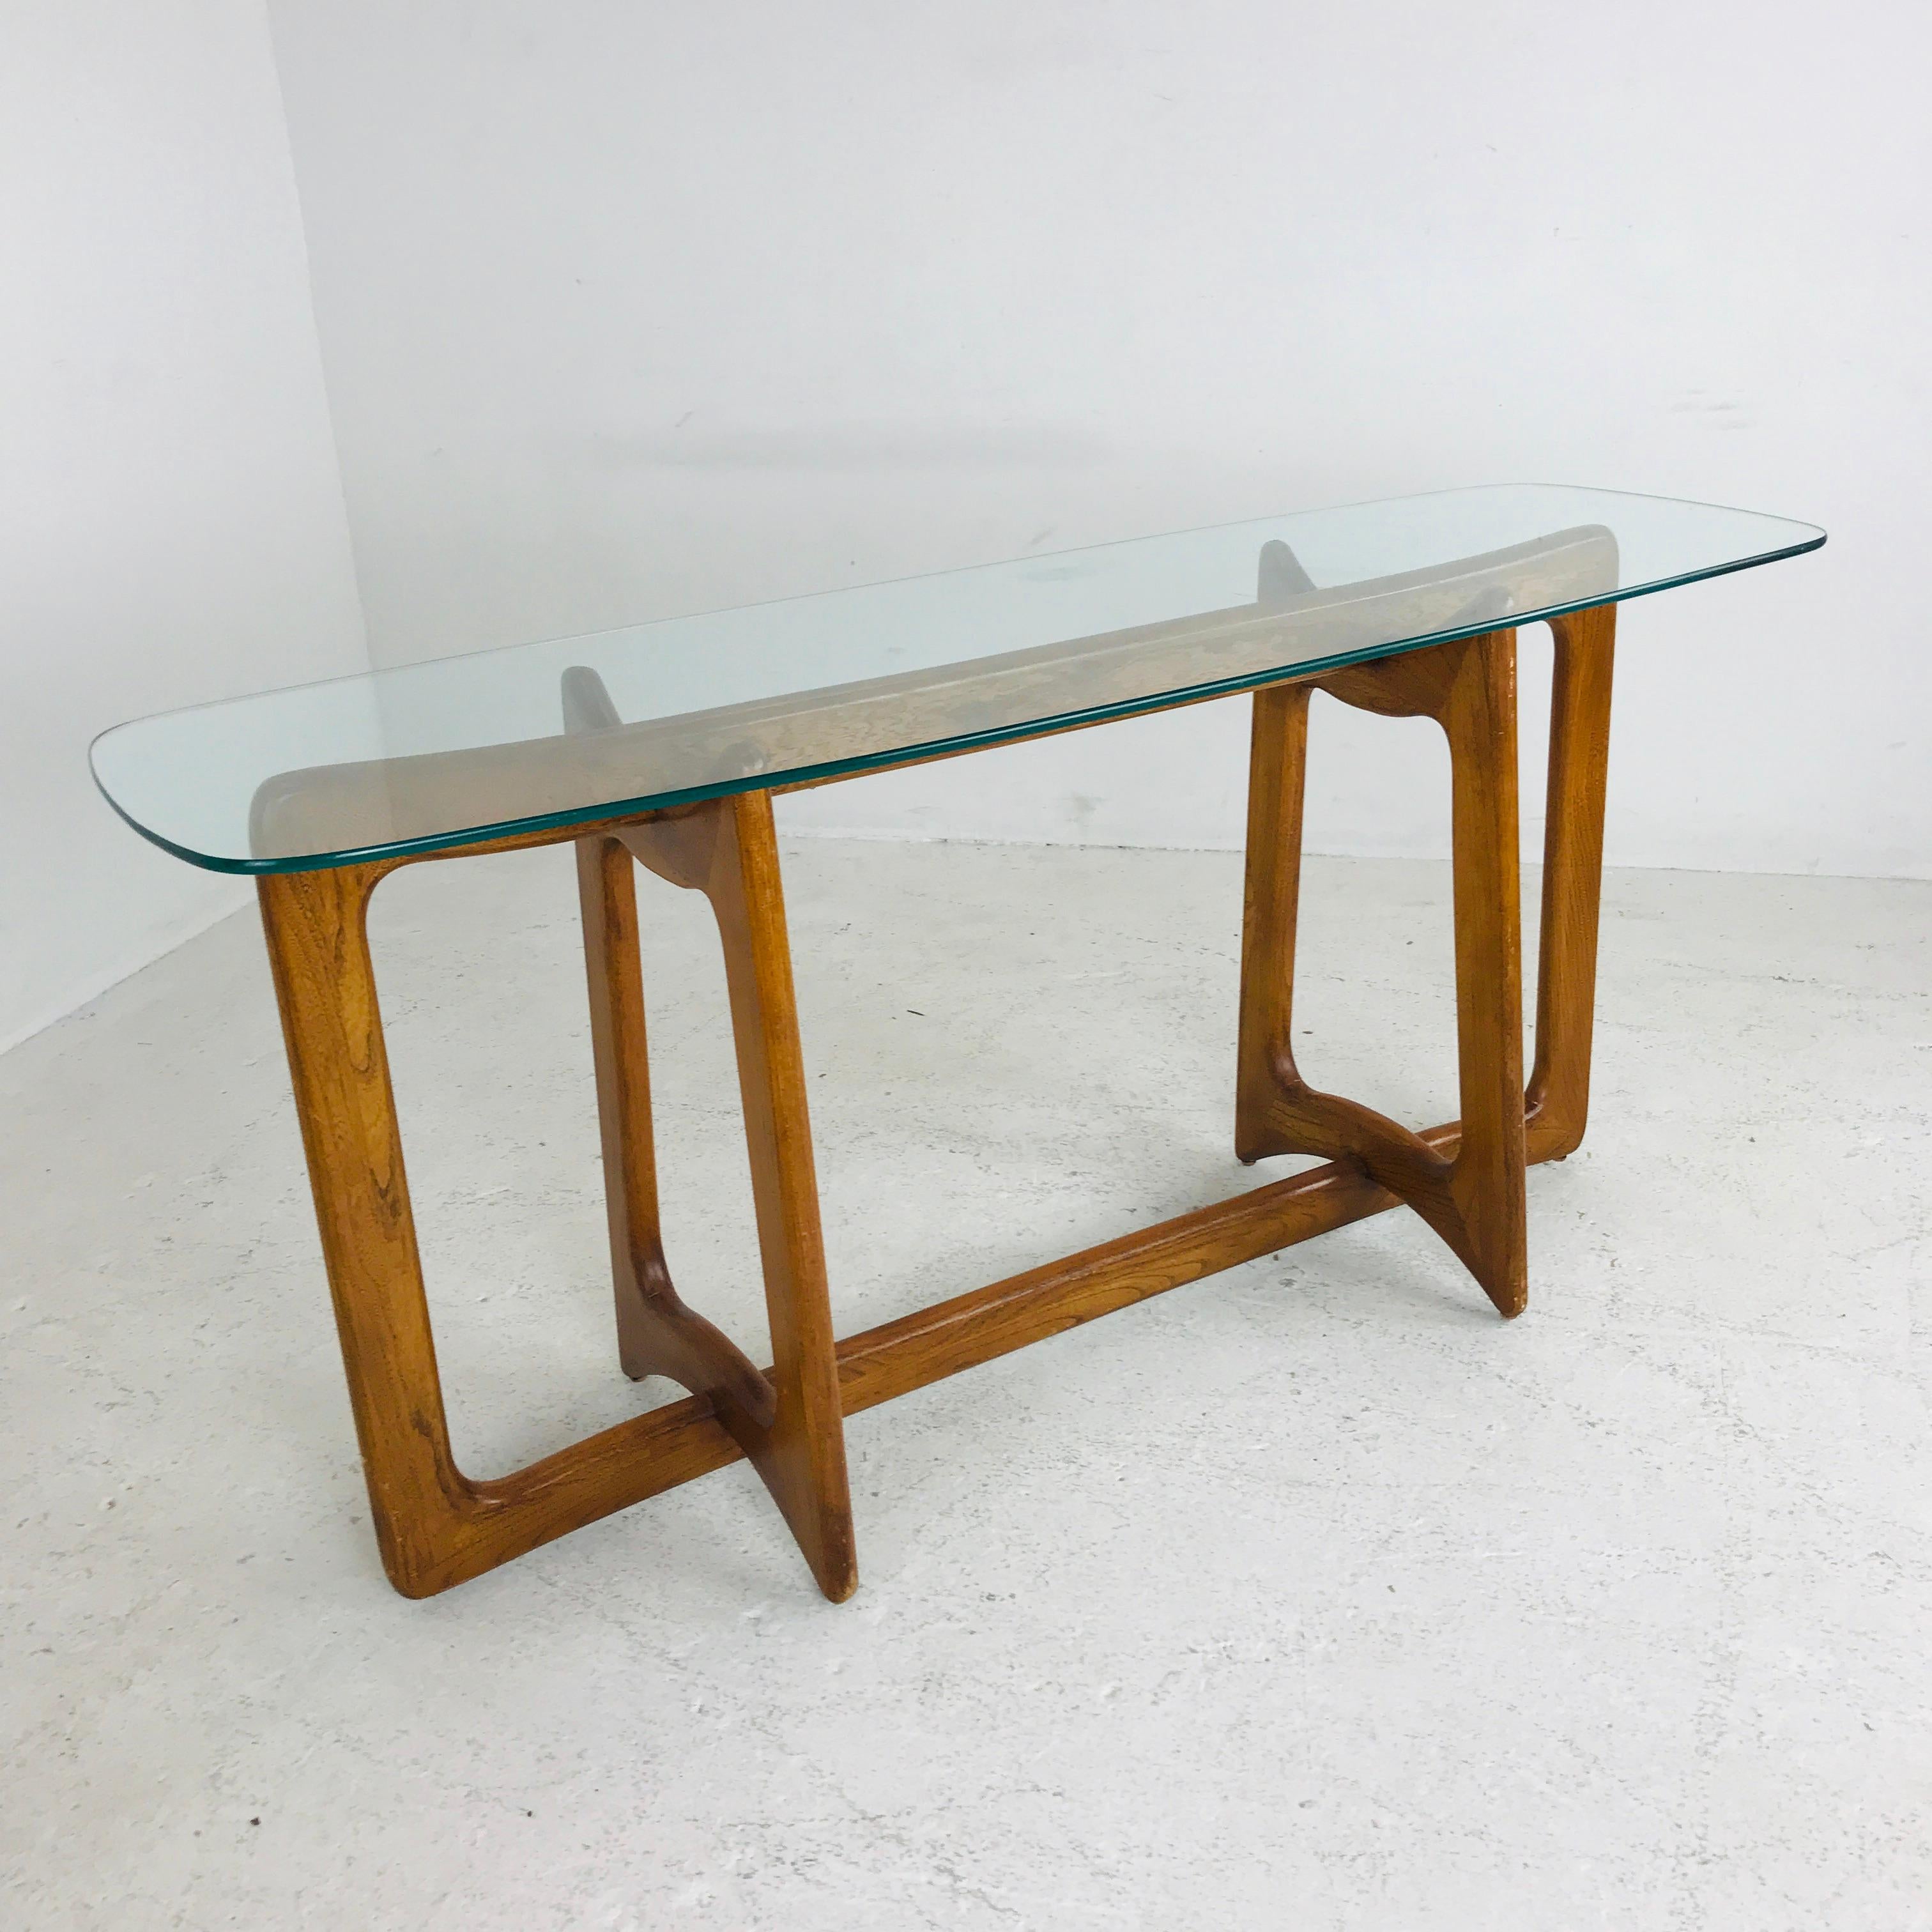 adrian console table